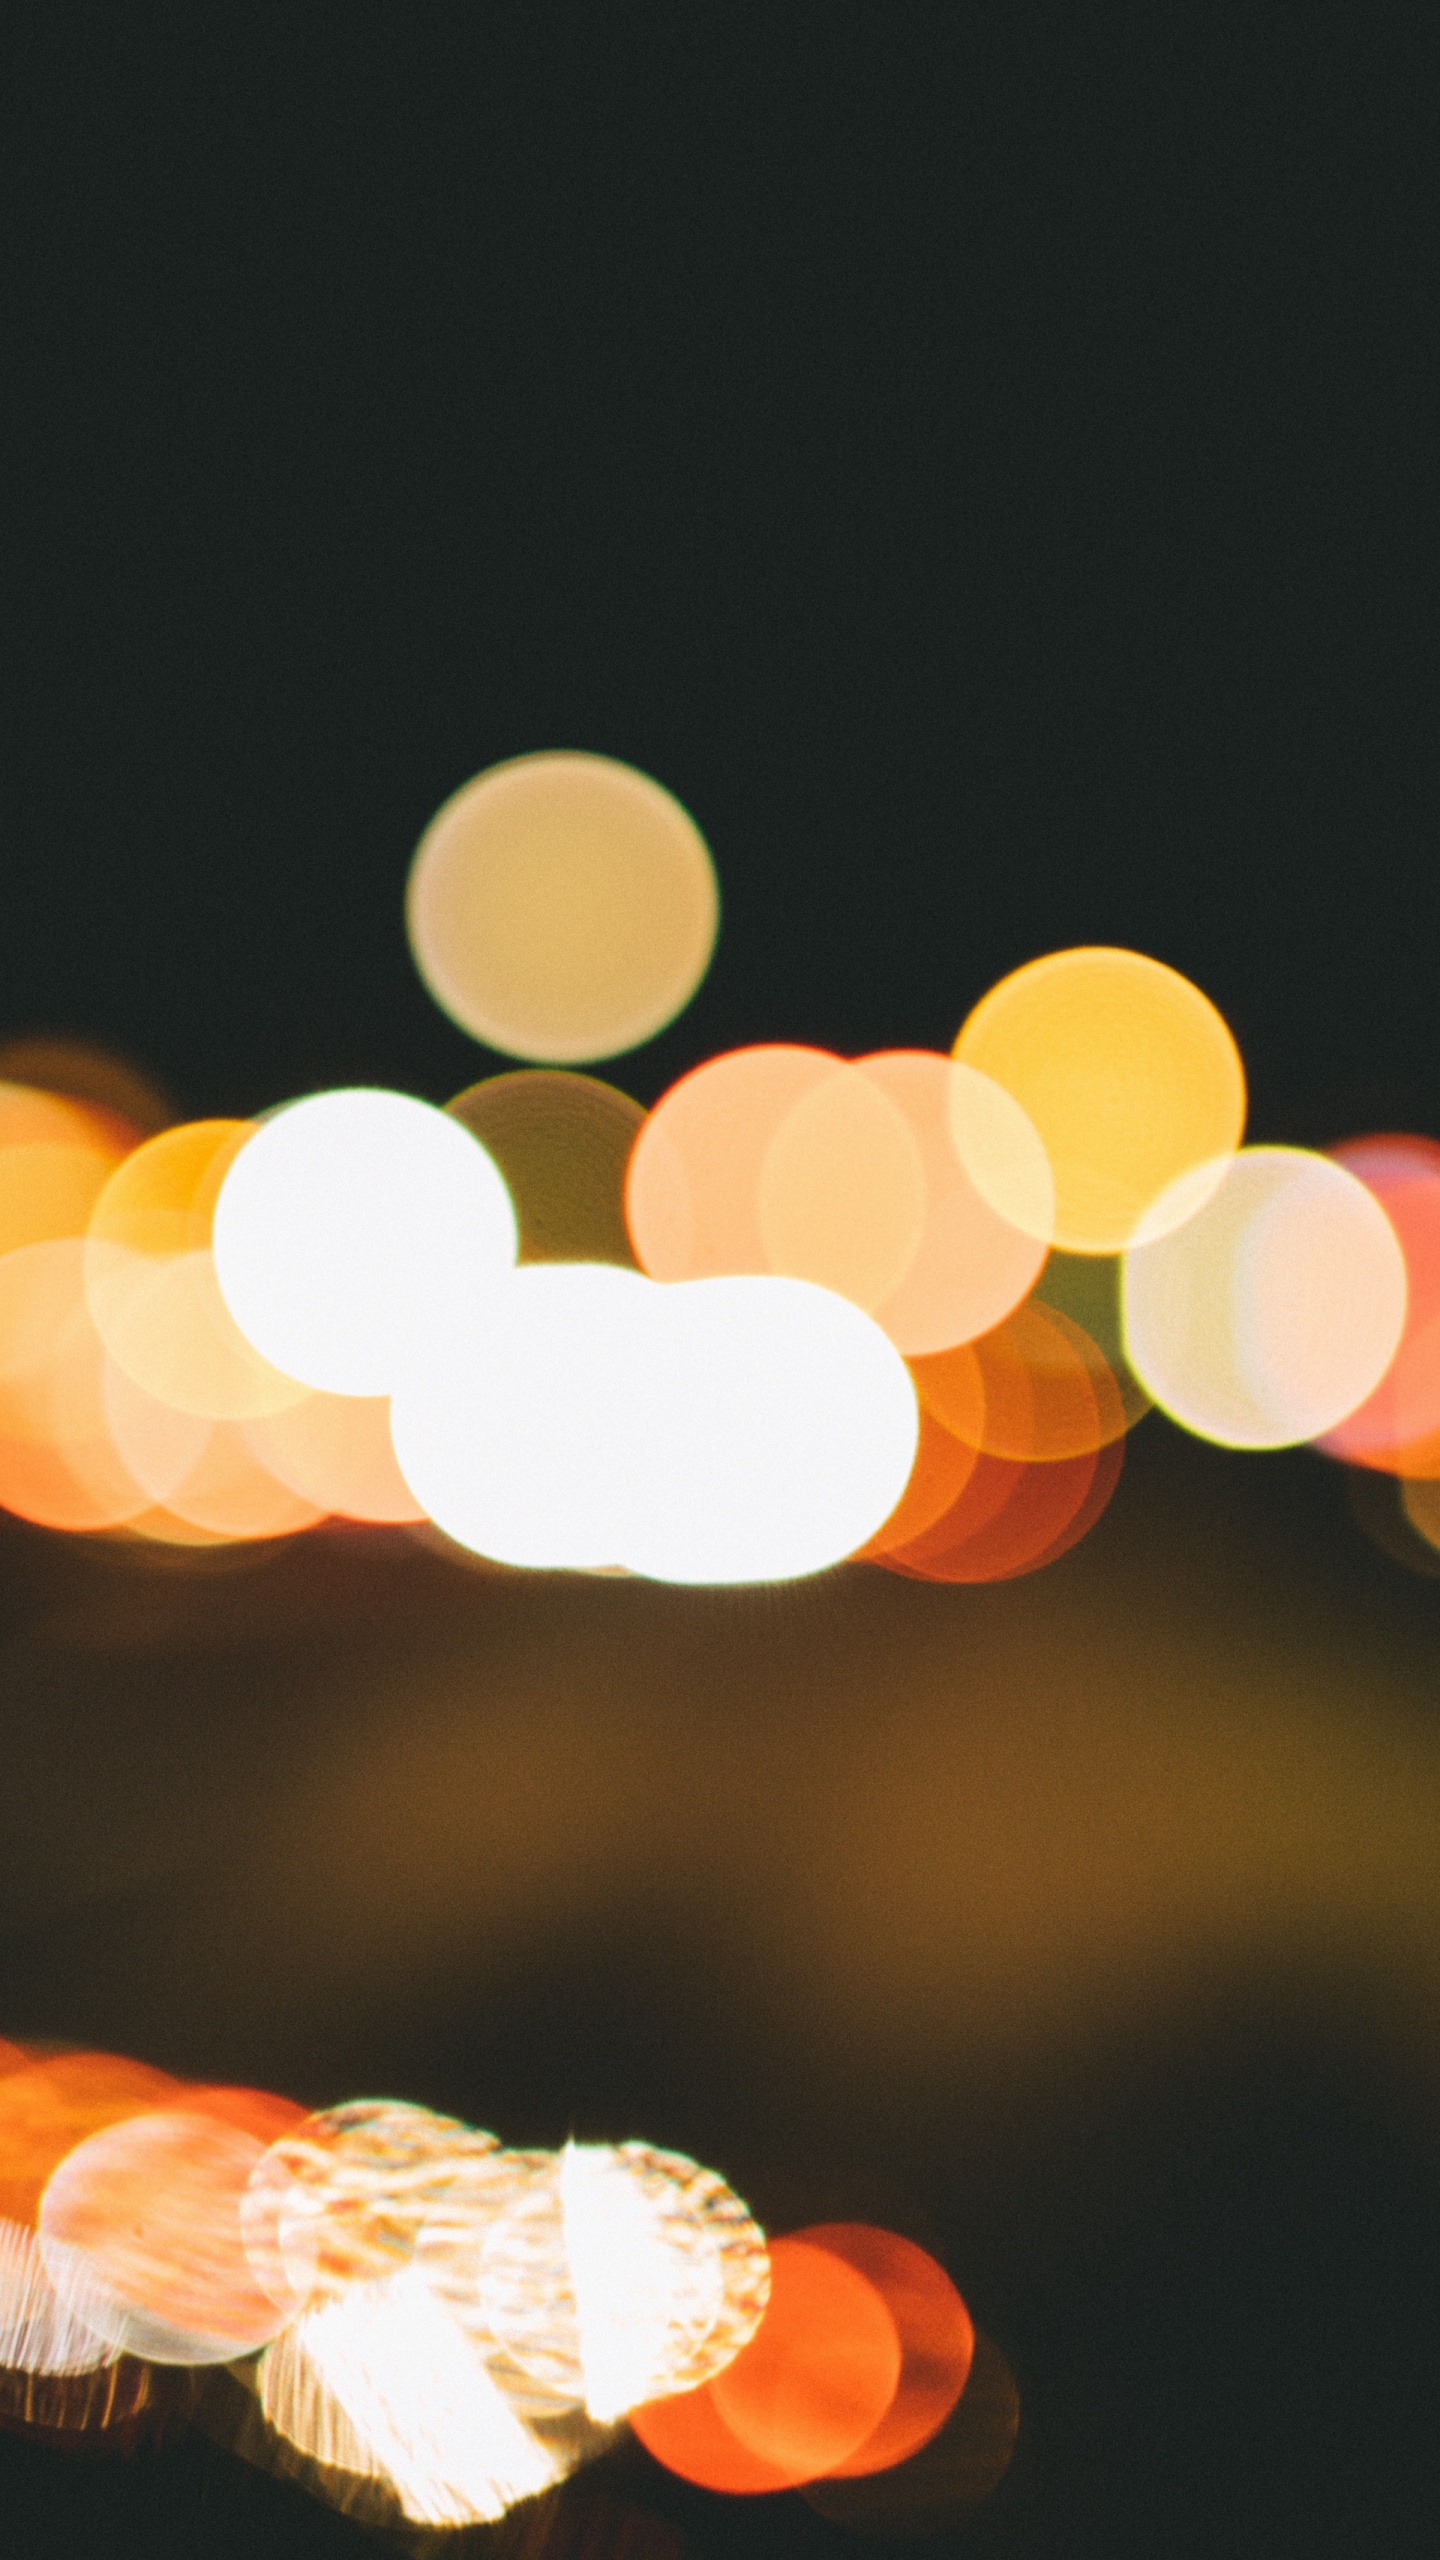 Bokeh Photography of Yellow Lights. Wallpaper in 1440x2560 Resolution